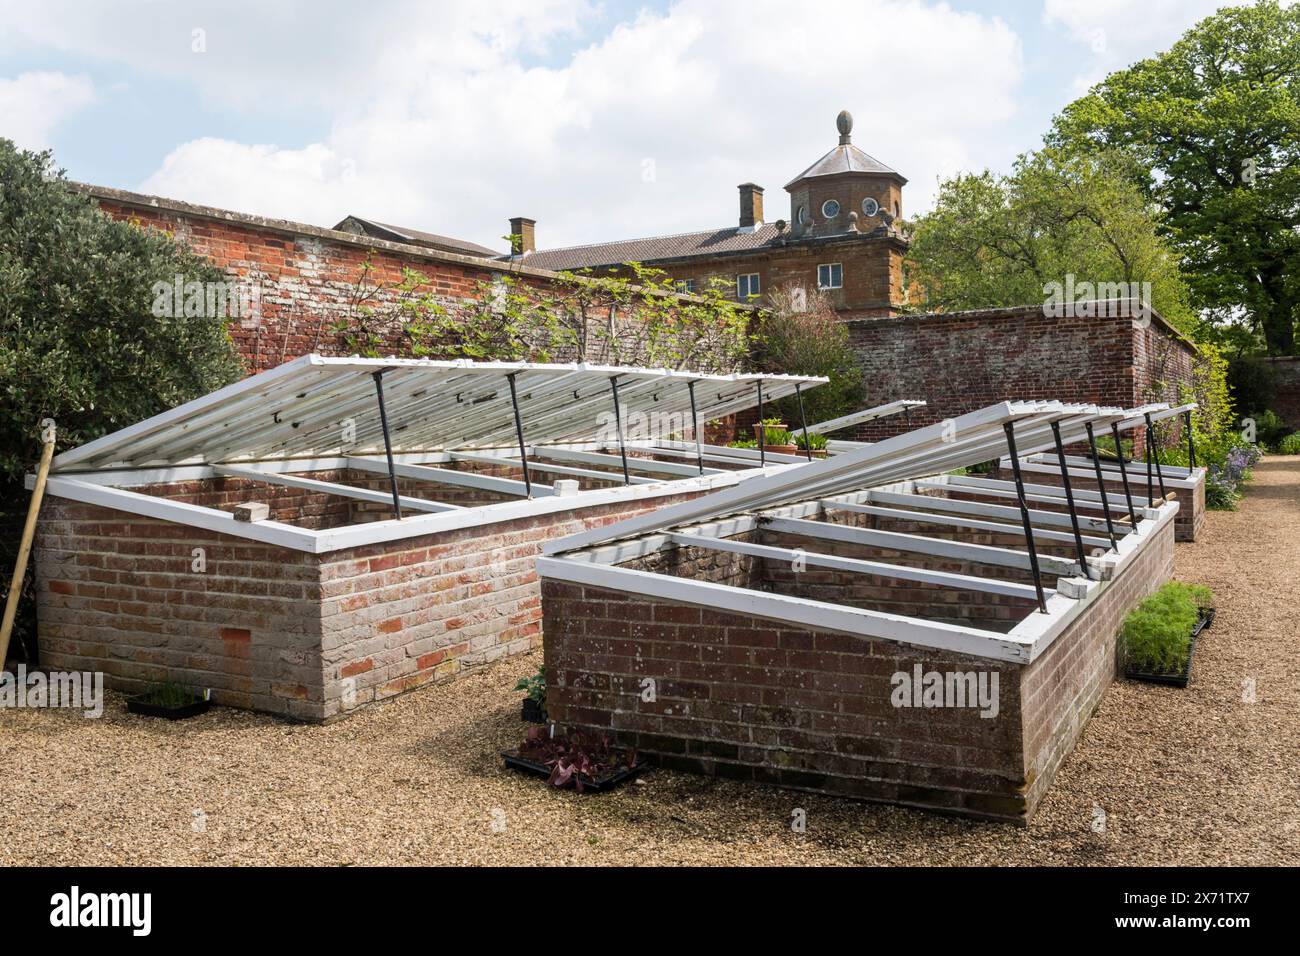 Cold frames for growing and protecting young plants. At the gardens of Houghton Hall in Norfolk. Stock Photo